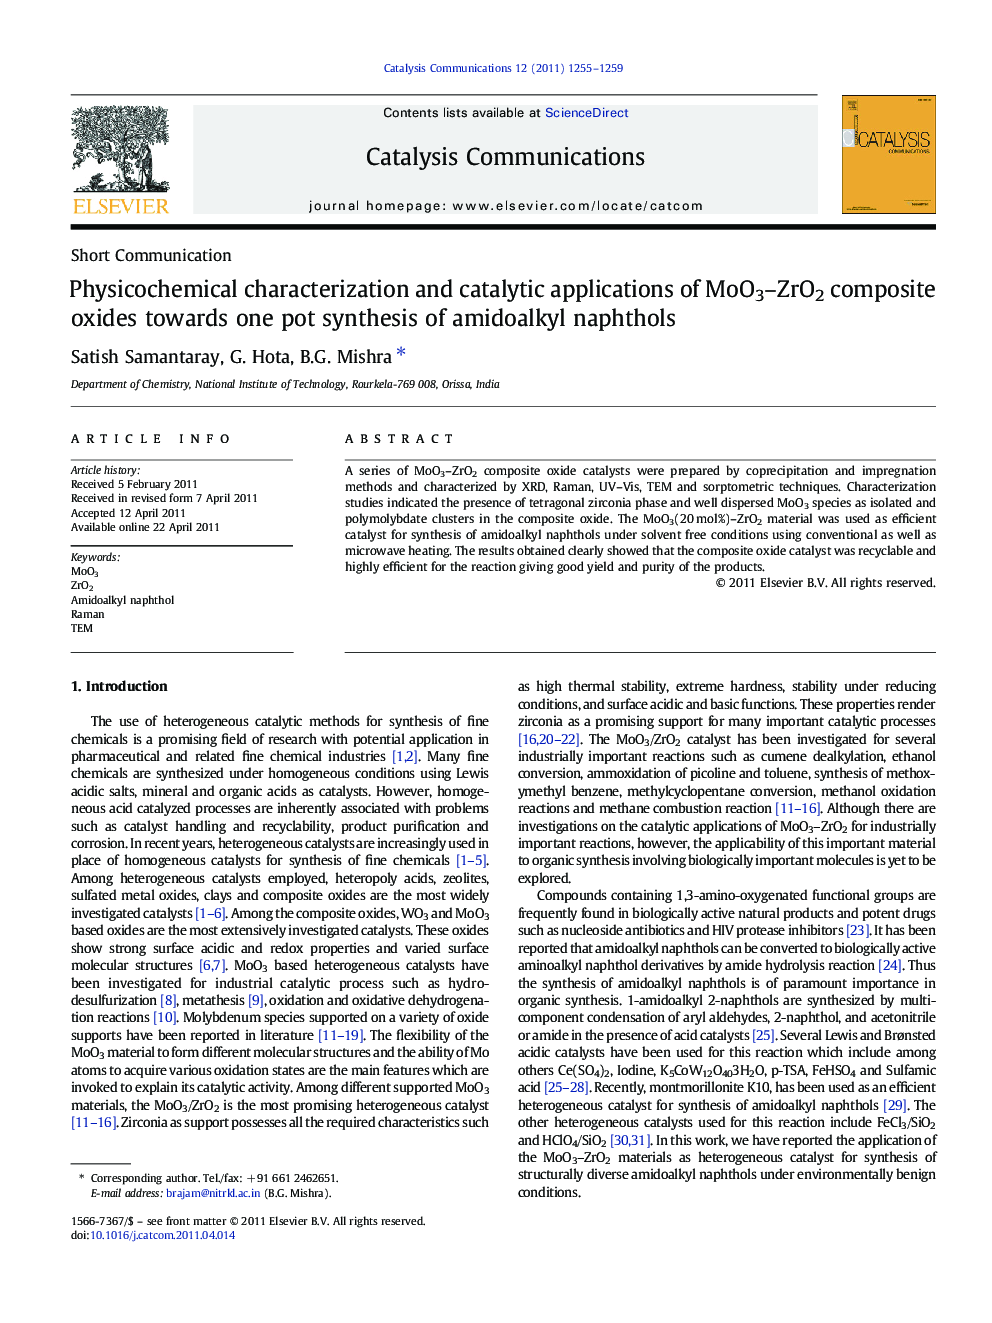 Physicochemical characterization and catalytic applications of MoO3–ZrO2 composite oxides towards one pot synthesis of amidoalkyl naphthols